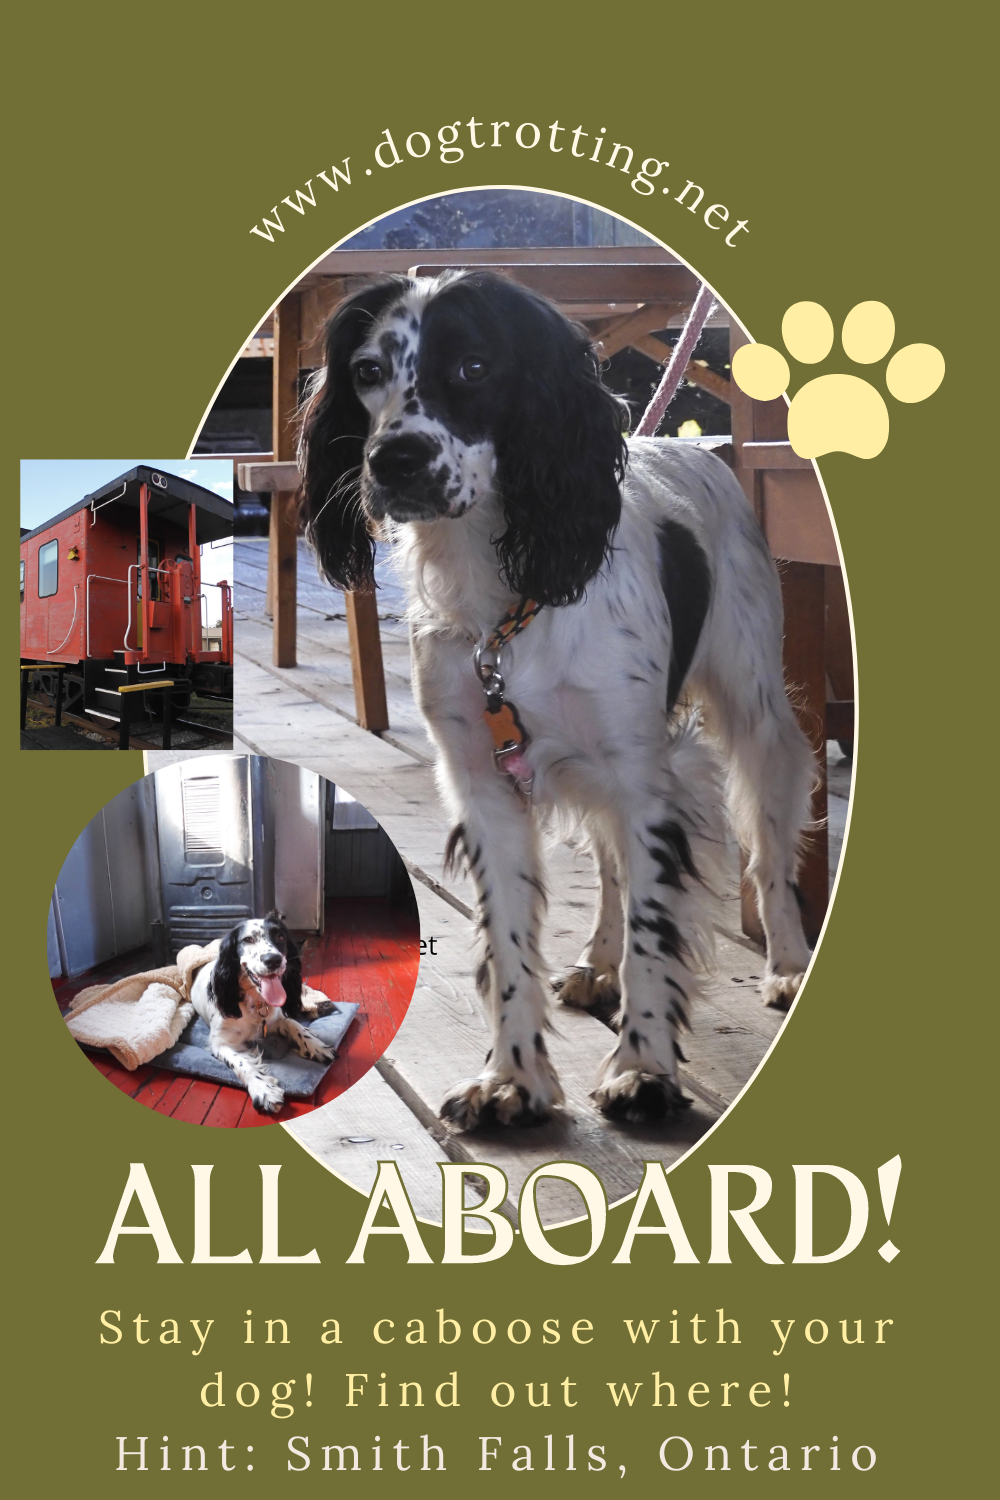 black and white dog on poster promoting post about staying in a caboose in Smiths Falls, Ontario, Canada